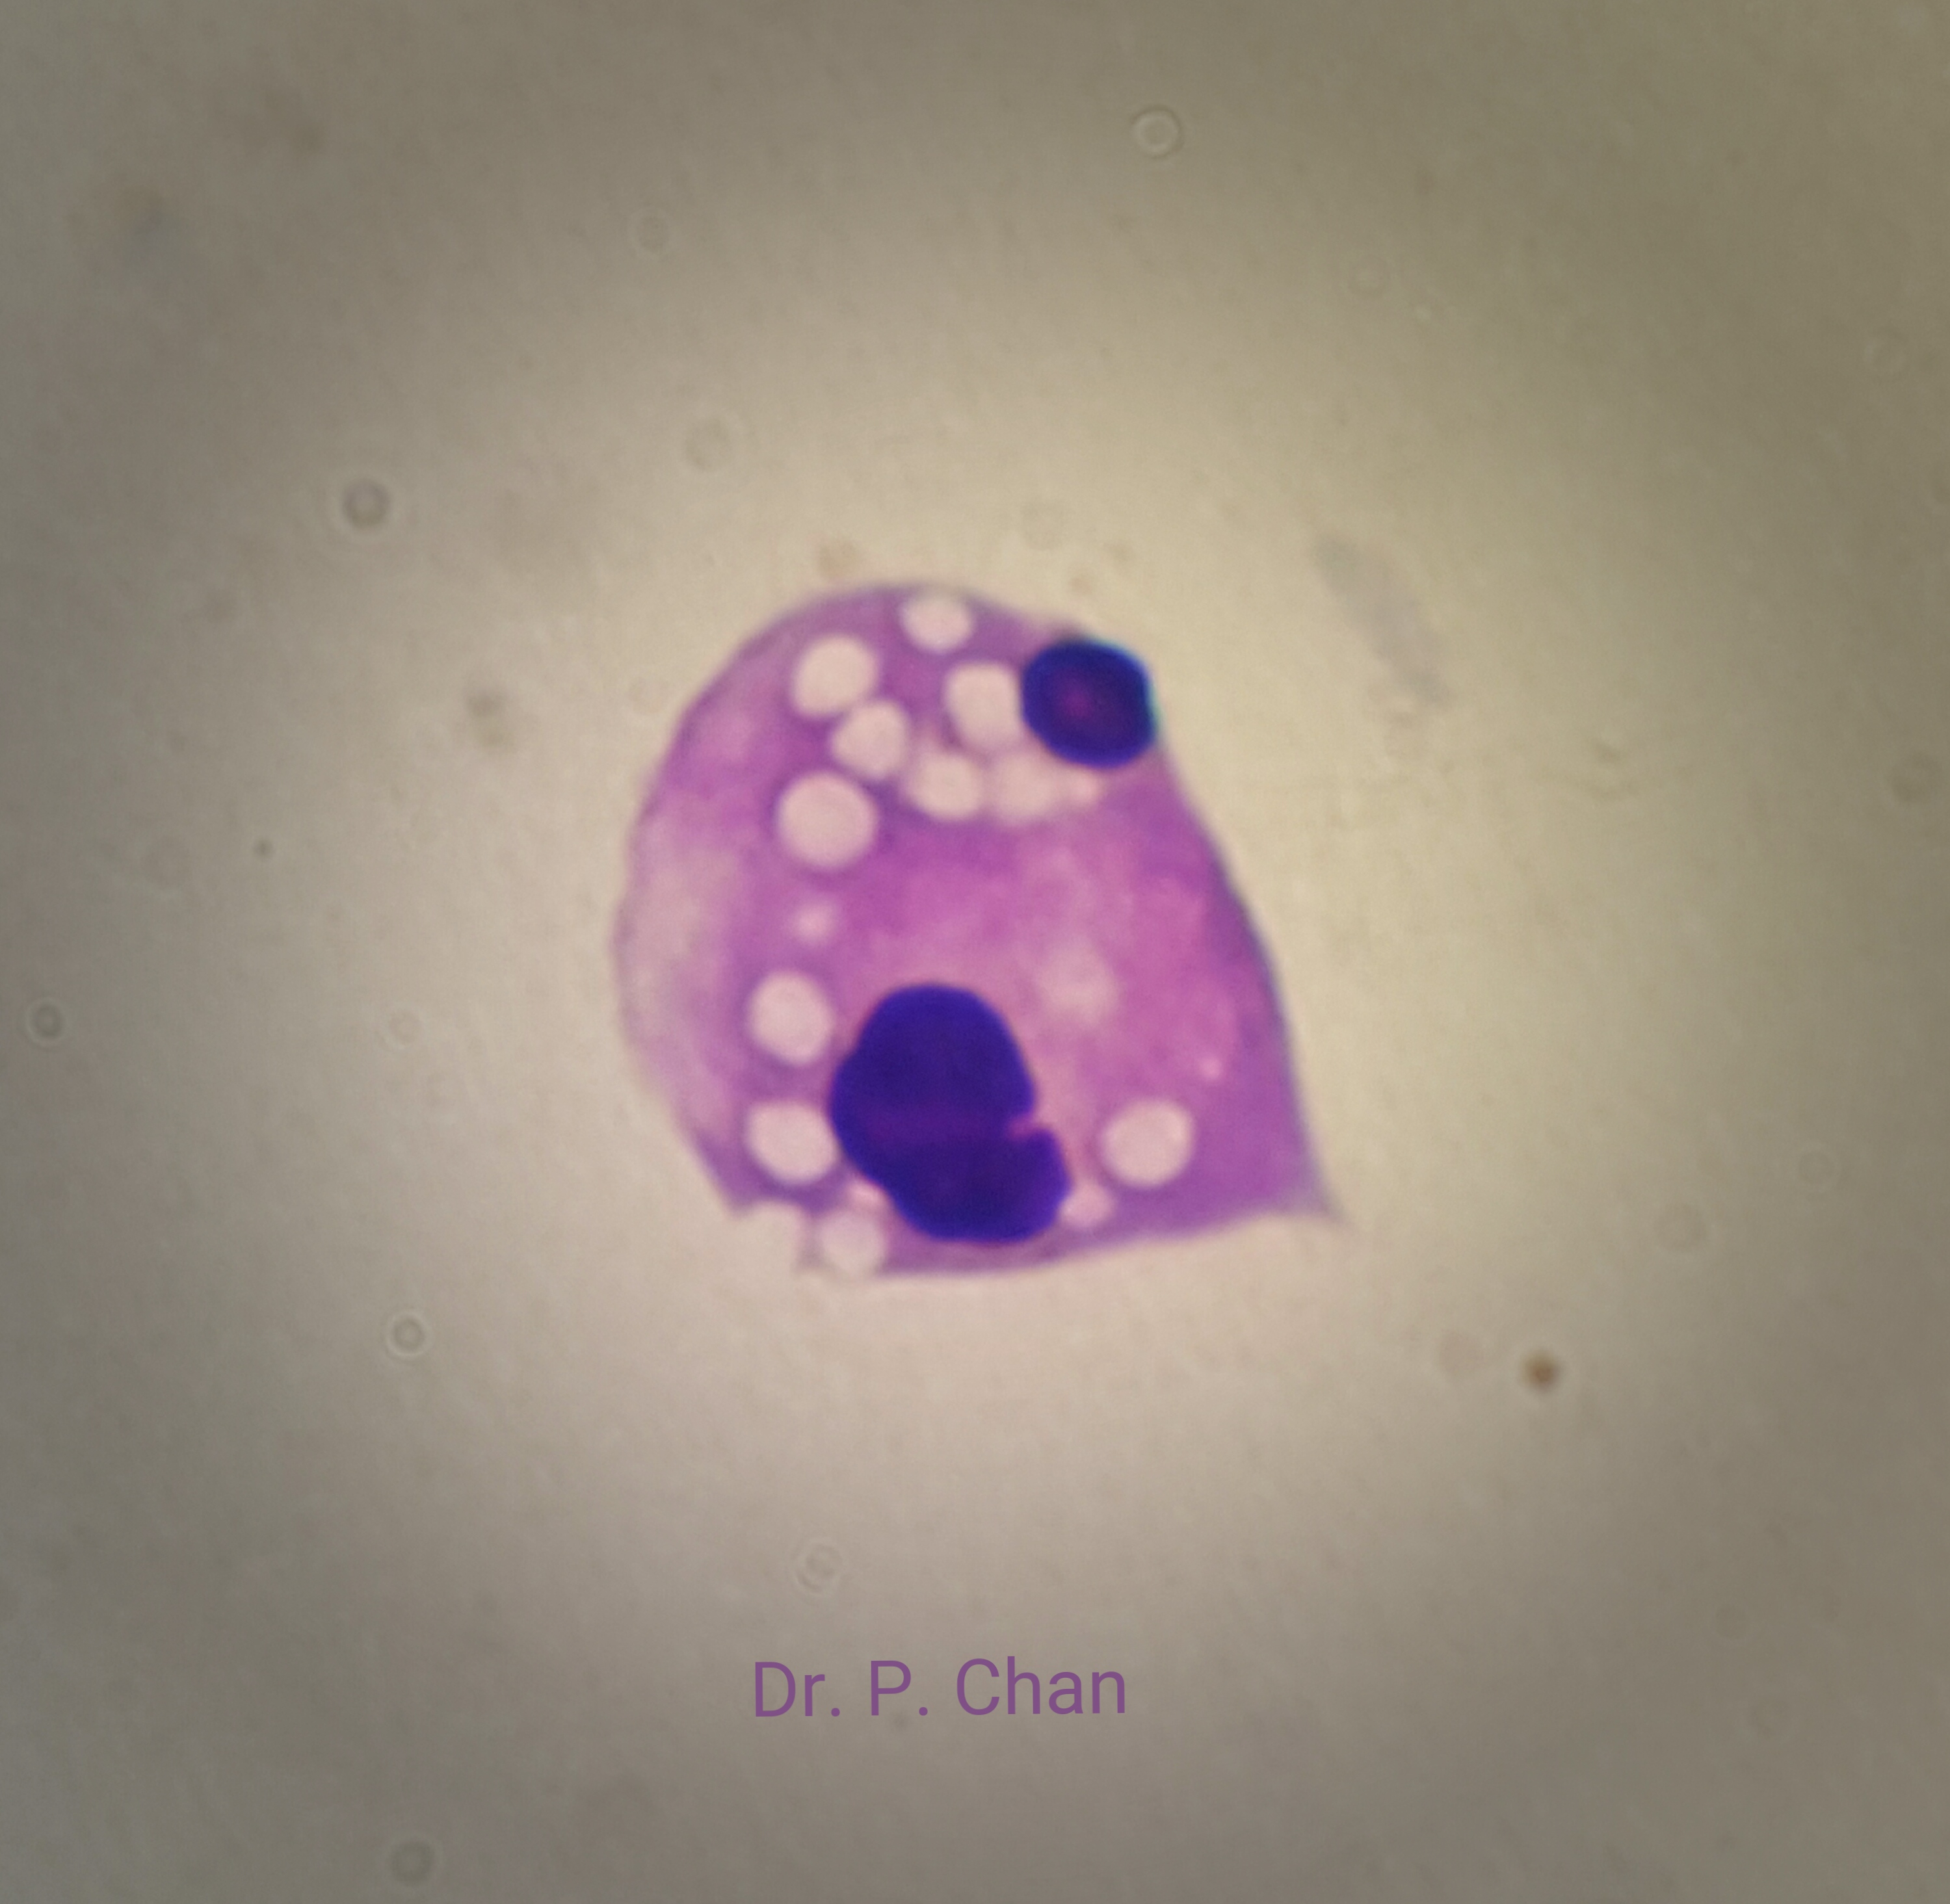 Three unseparated sperm nuclei with vacuoles.